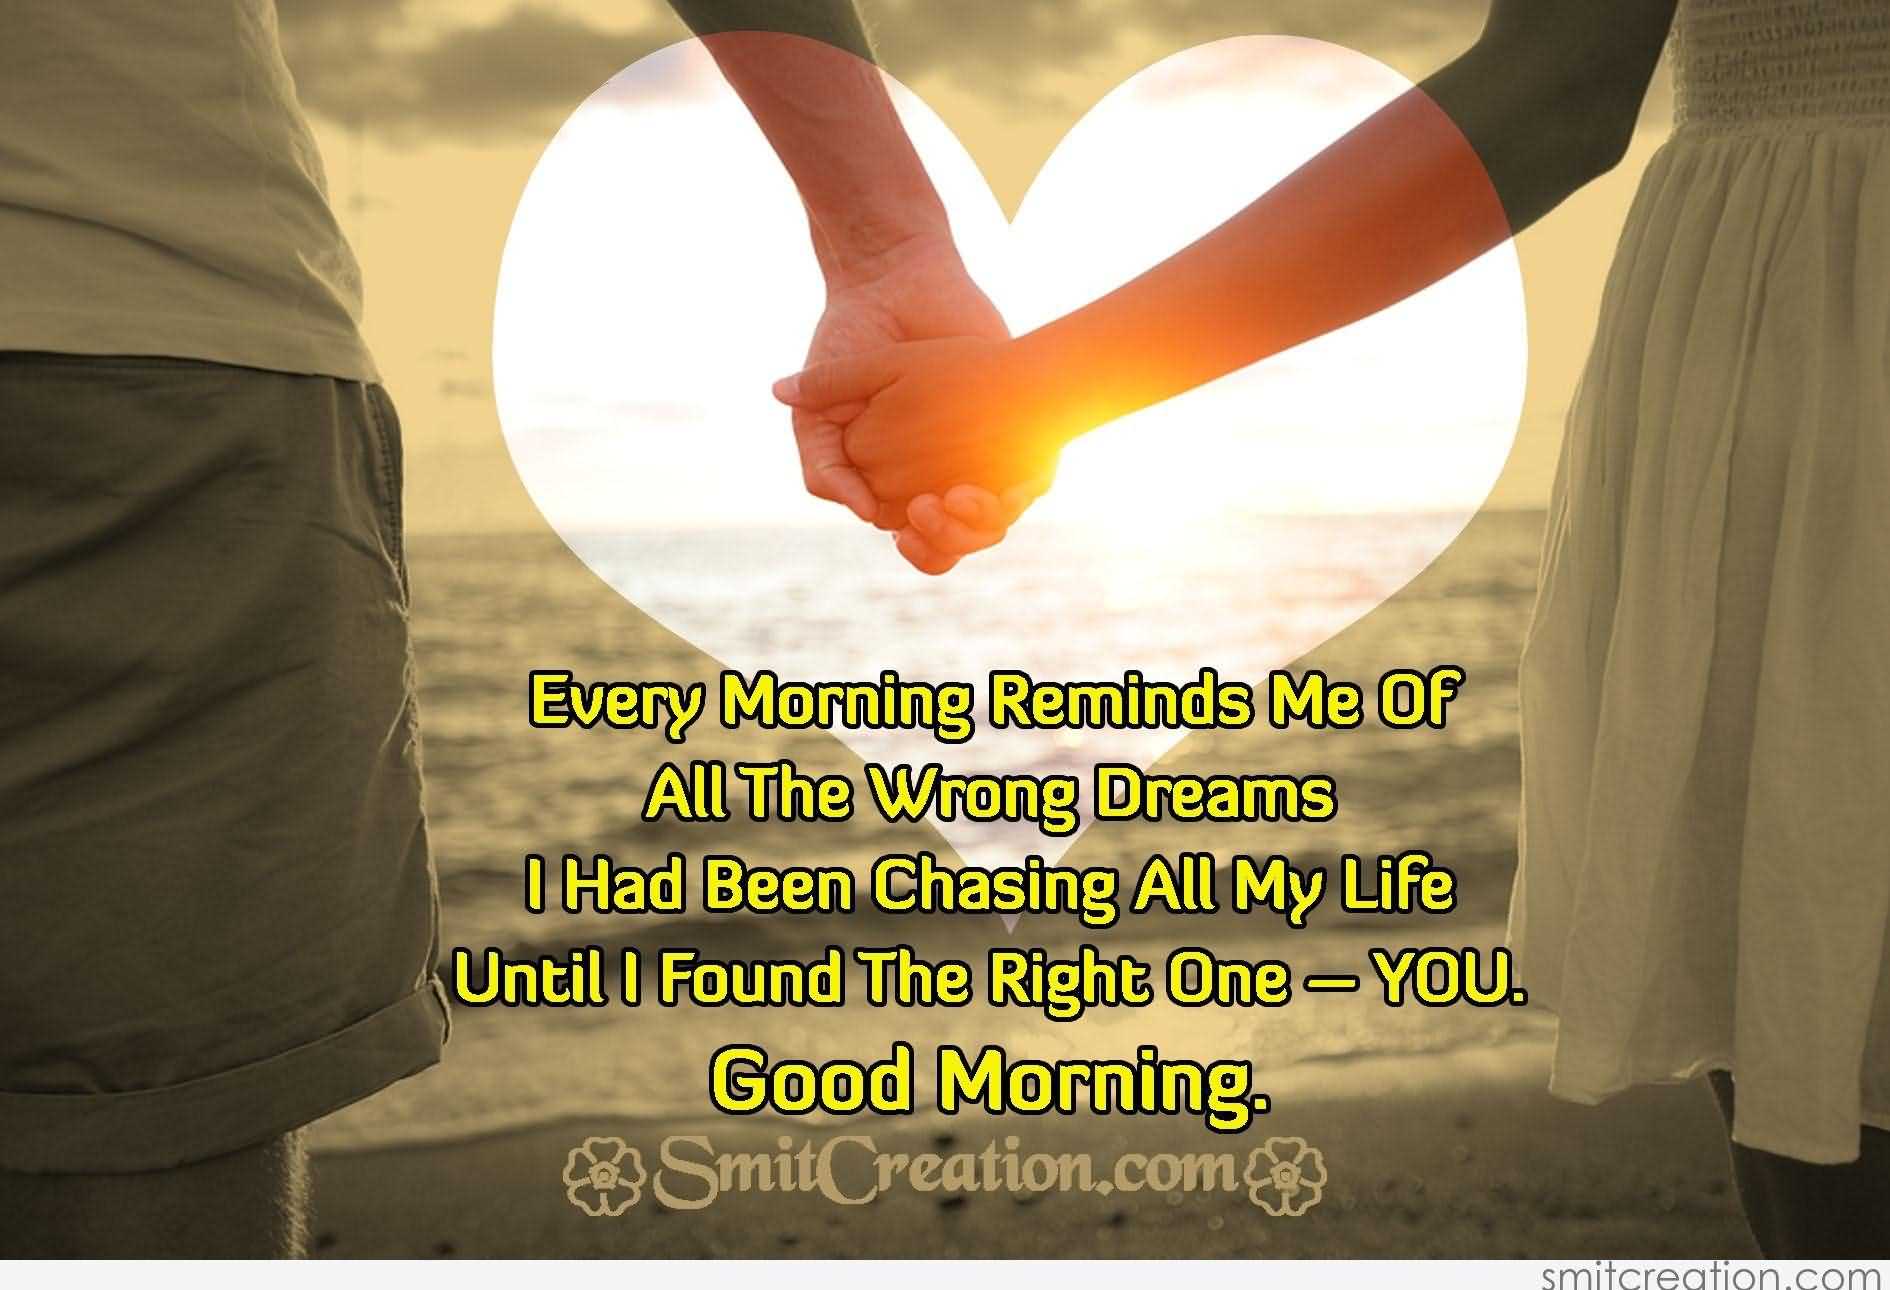 Download Good Morning Wishes For Girlfriend Image Special Good Morning Wishes For Girlfriend